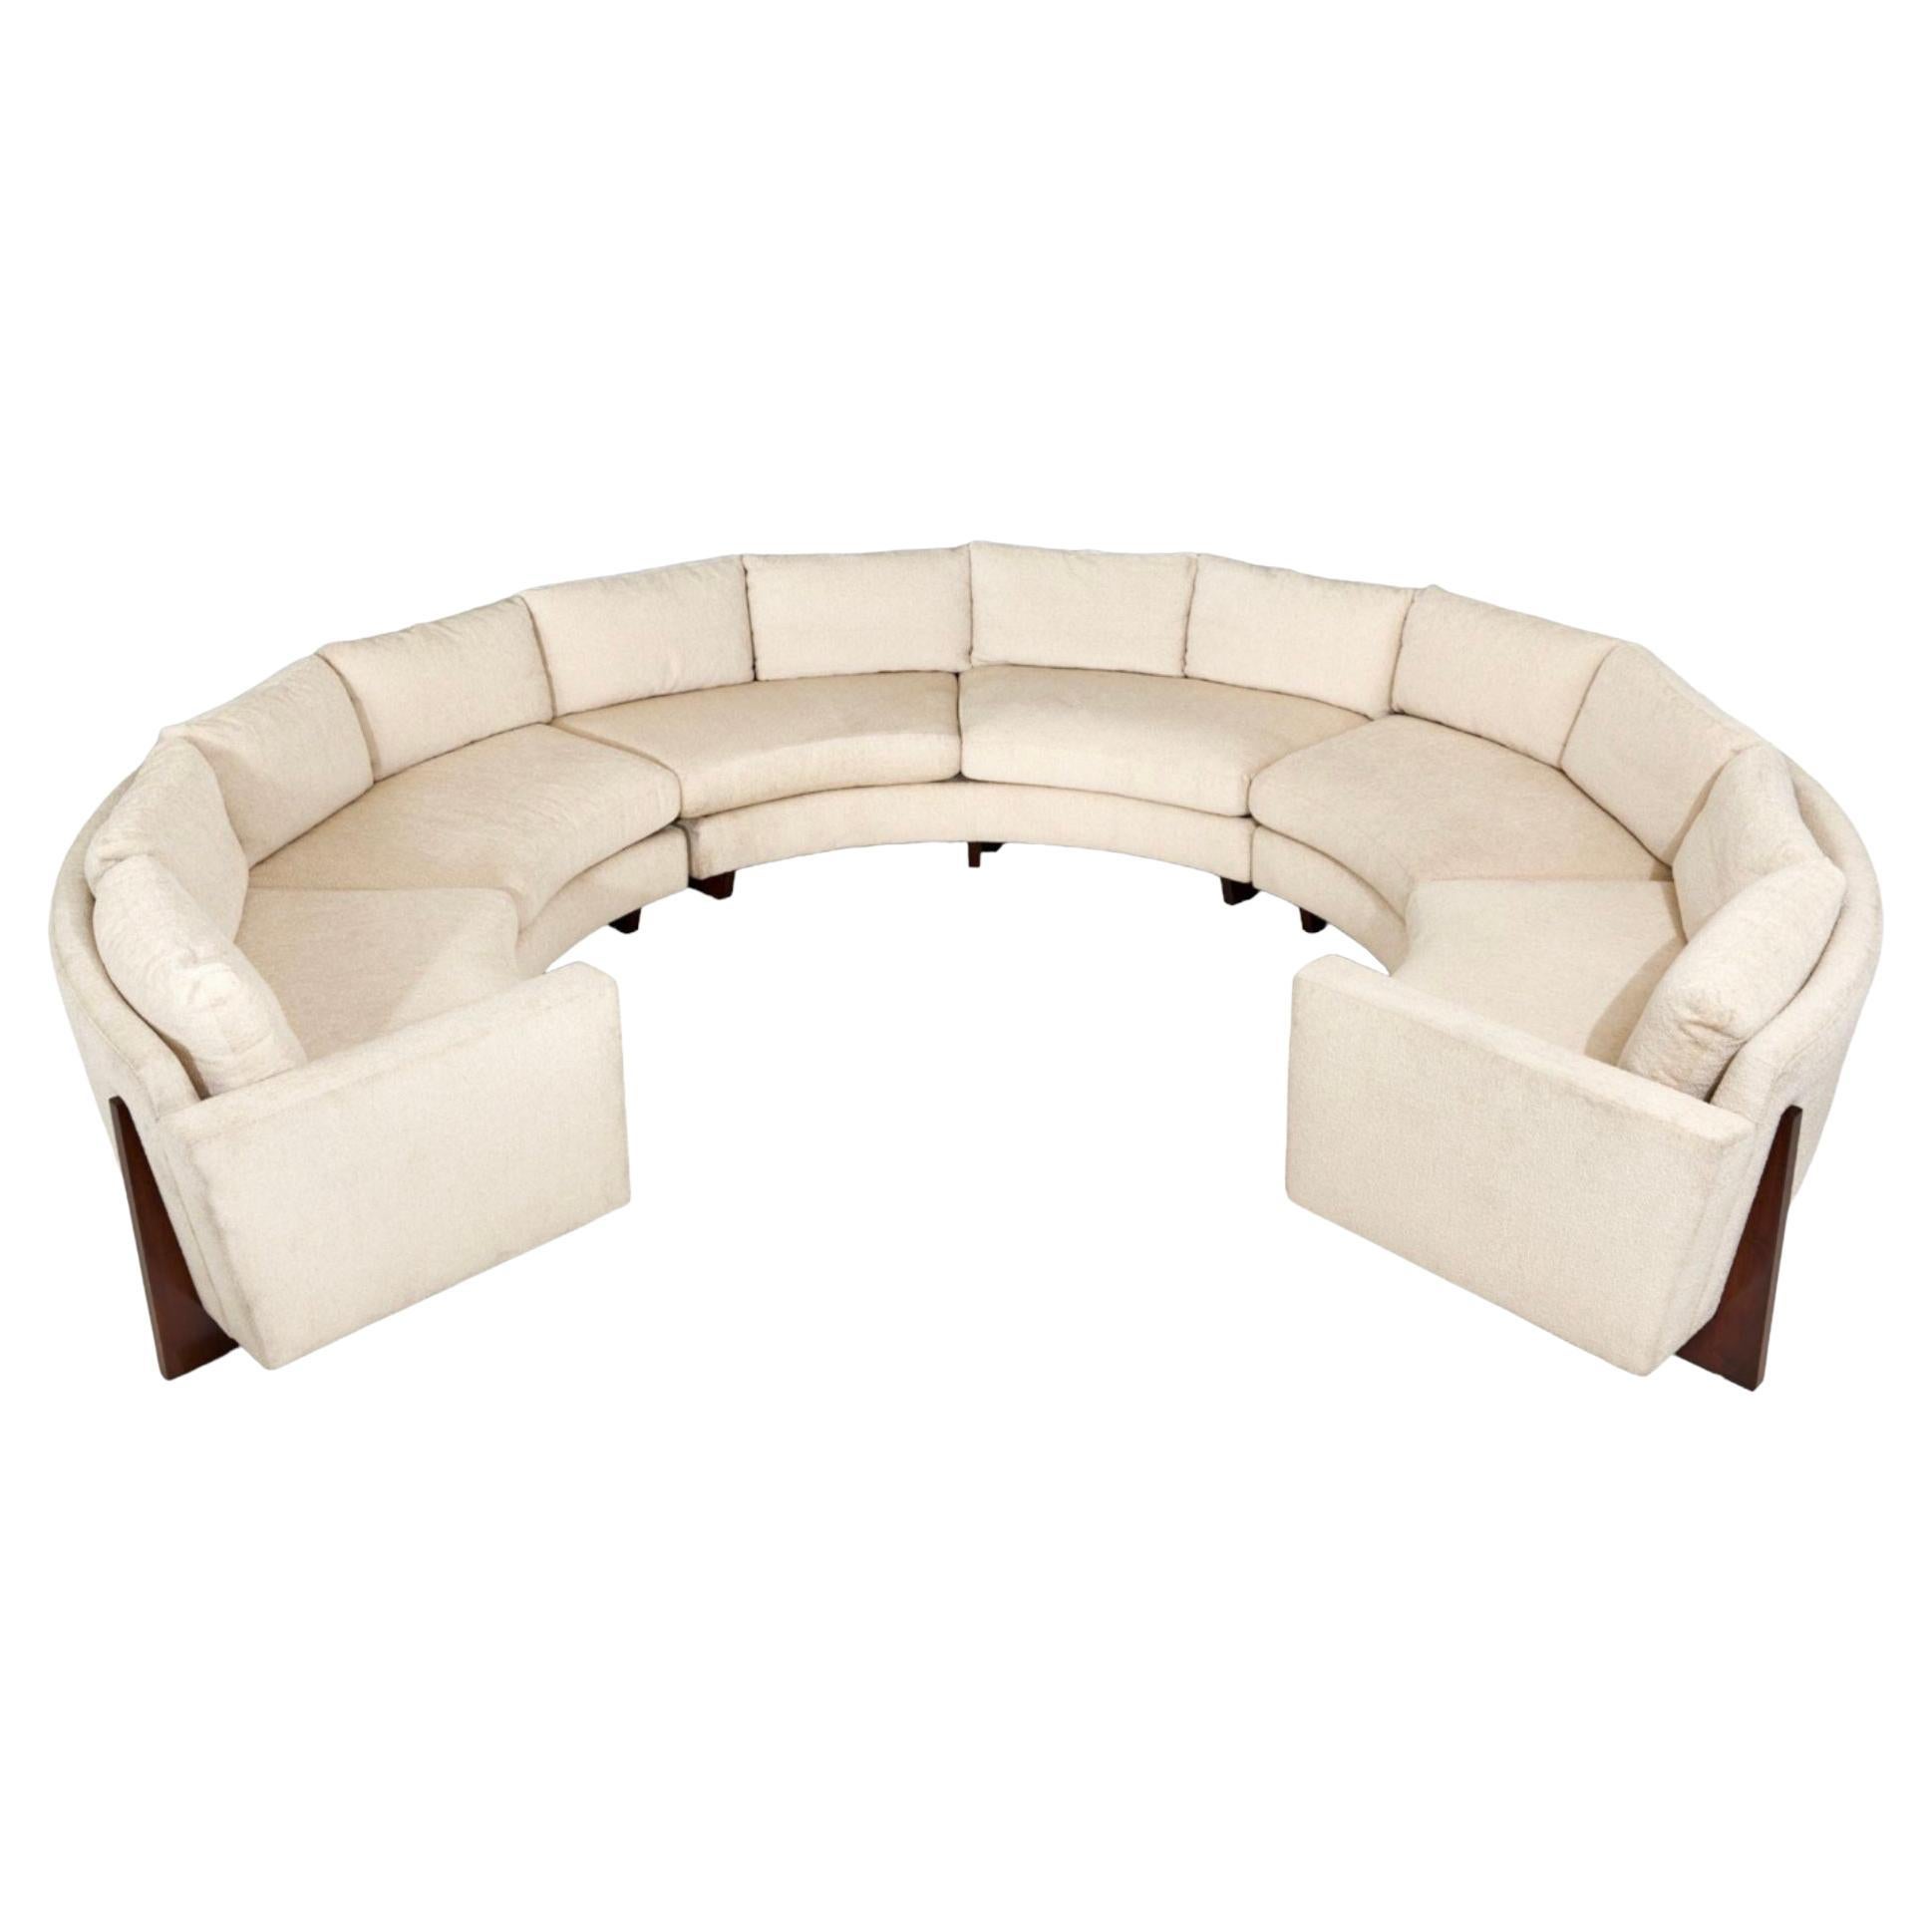 3 Piece Circular Sectional Sofa w/walnut by Ransom Culler for Thayer Coggin 1960 For Sale